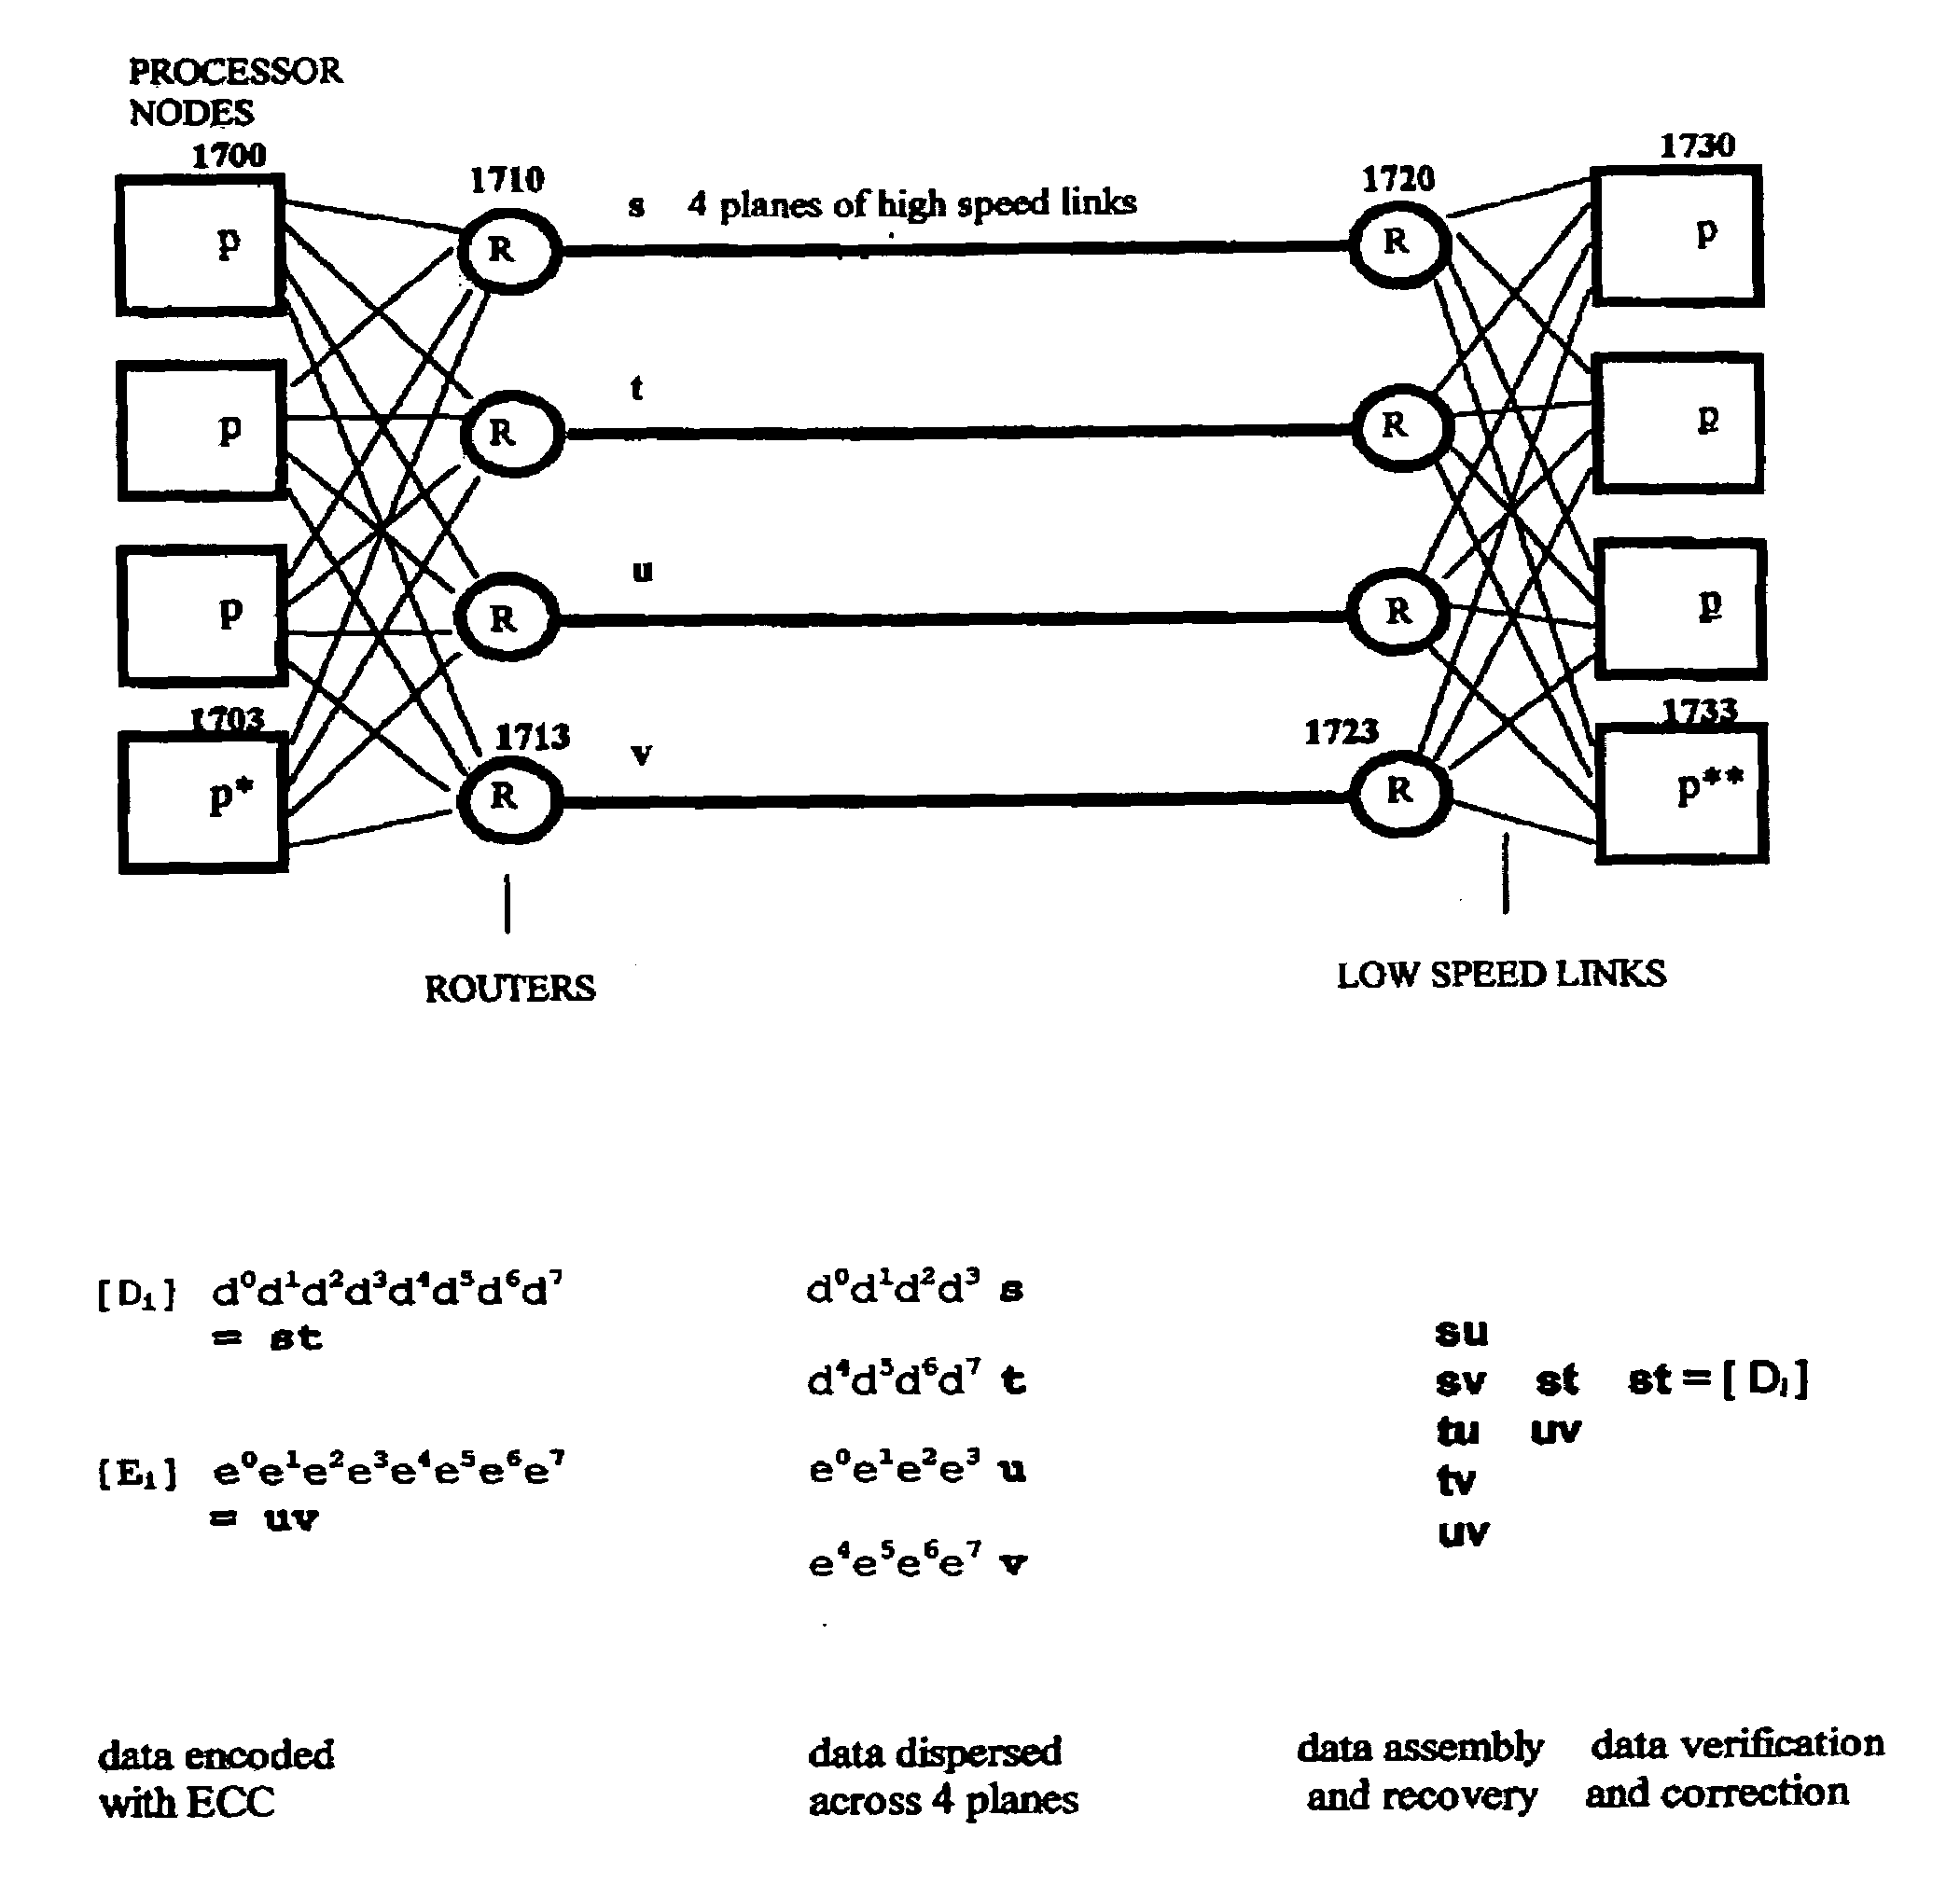 Multi-dimensional data protection and mirroring method for micro level data